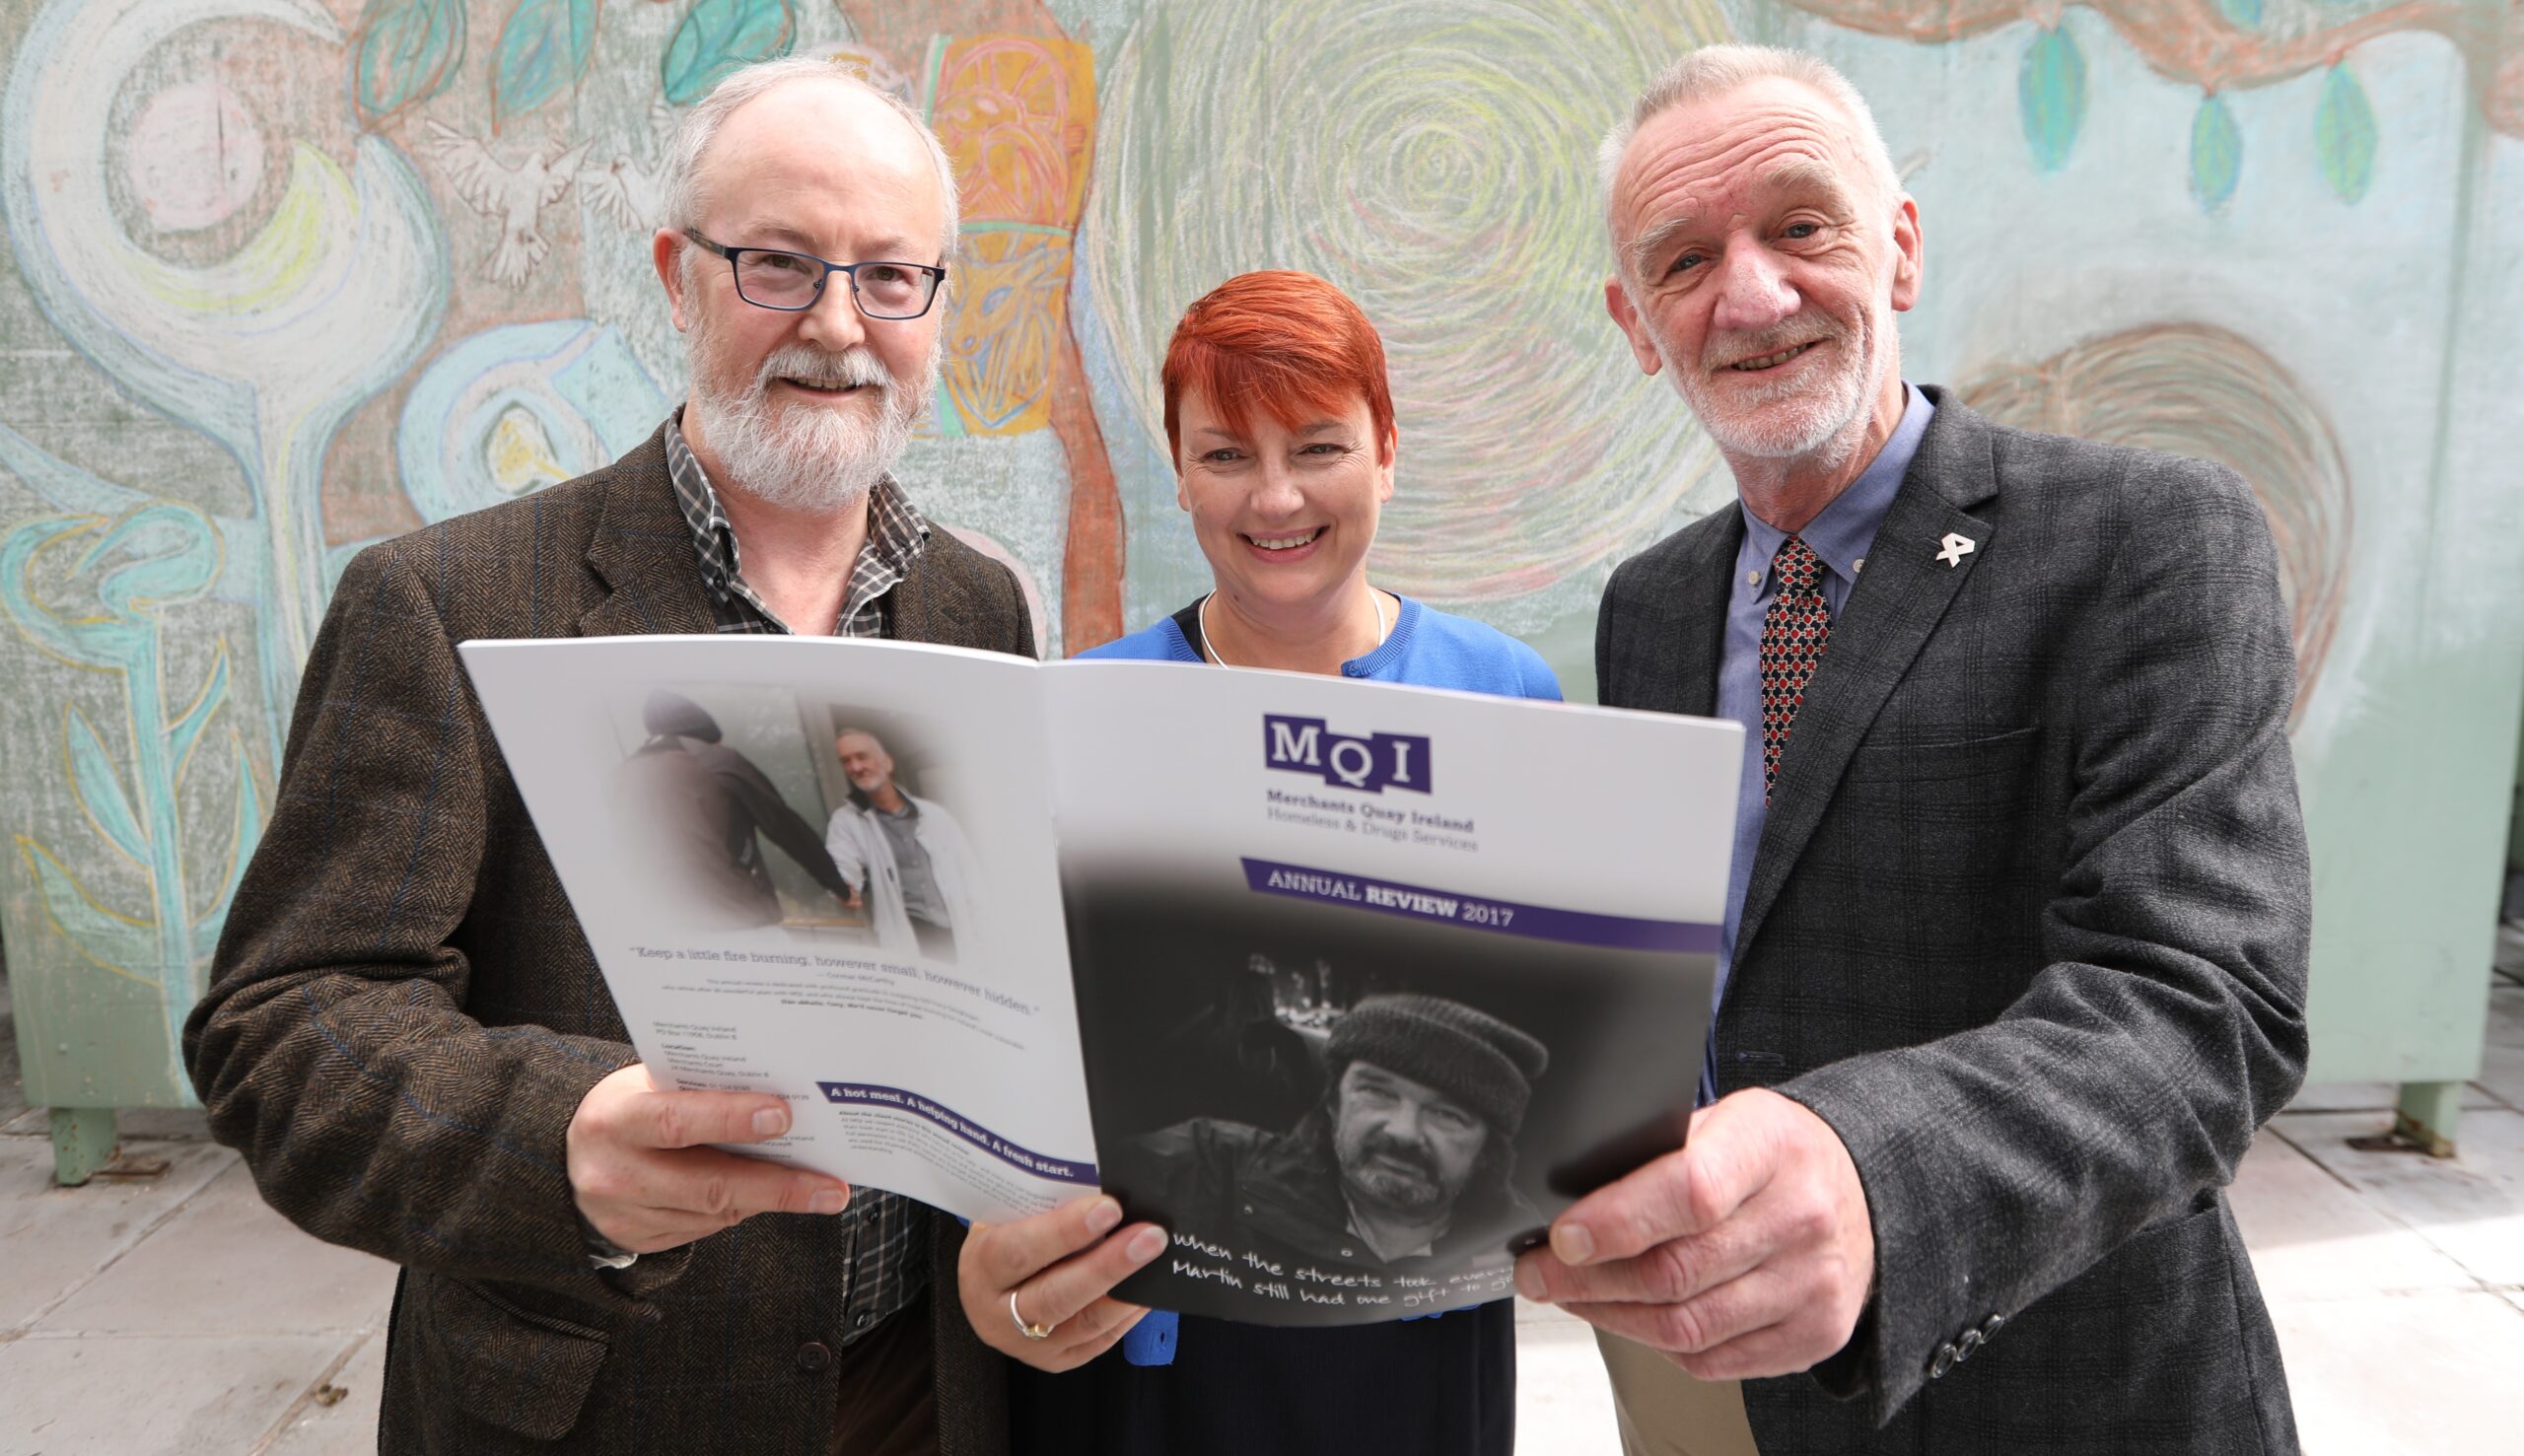 NO REPRO FEE 14/09/2018 Merchants Quay Ireland Homeless and Drugs Services publish their annual report. Pictured are (LtoR) Mike Price Chairtman, Board of Directors, Paula Byrne the new CEO OF Merchants Quay Ireland, Catherine Byrne Minister of State for Health Promotion and Tony Geoghegan outgoing CEO of Merchants Quay Ireland Homeless and Drugs Services. Photo: Sasko Lazarov/Photocall Ireland